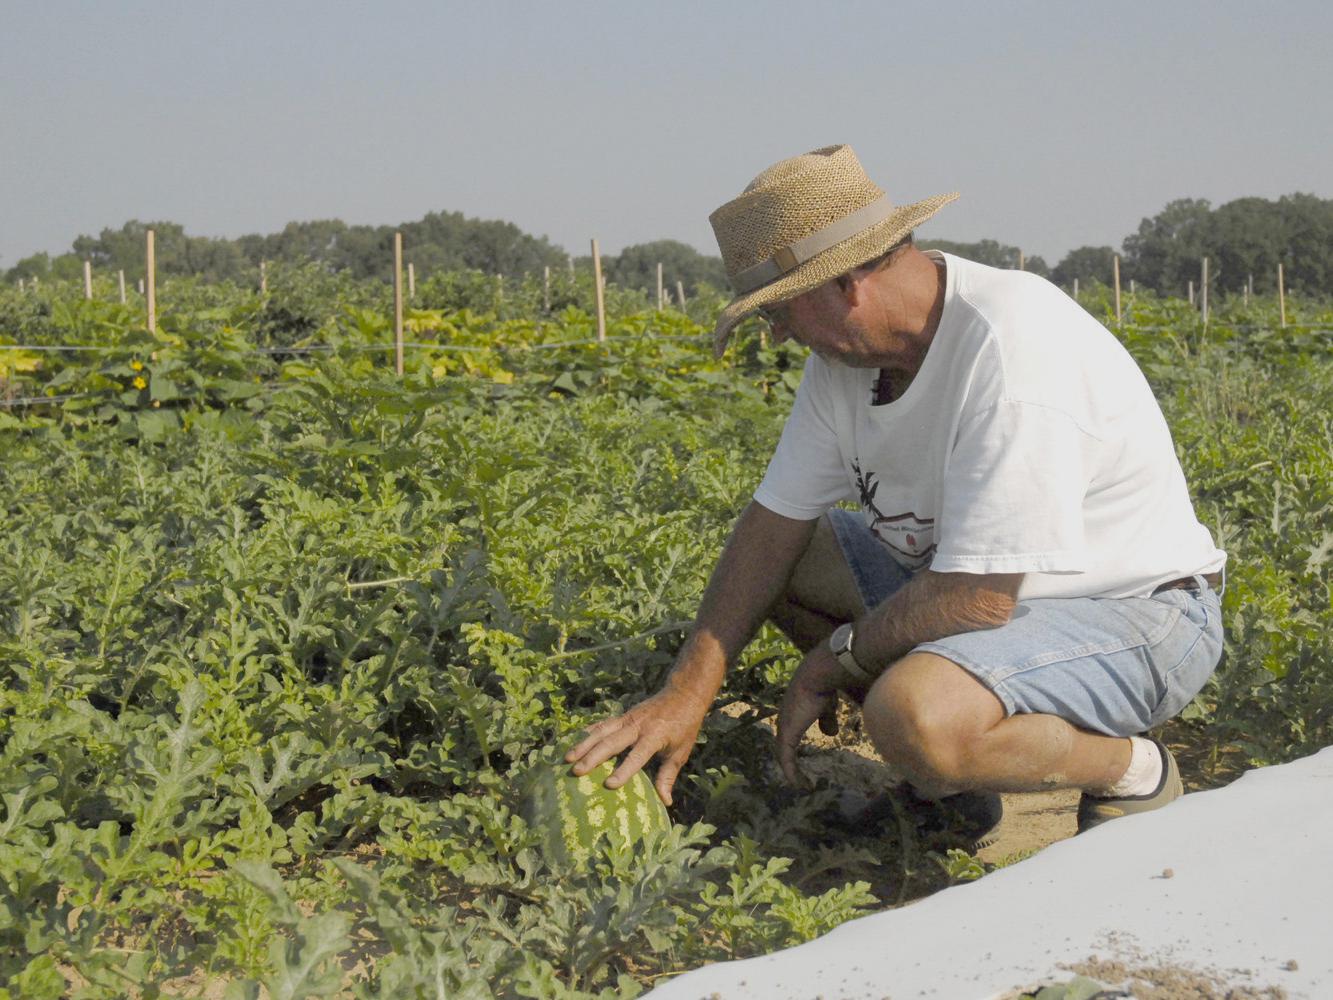 Chickasaw County farmer Doil Moore checks a young watermelon that will be ready before Fourth of July celebrations. (Photo by Linda Breazeale)